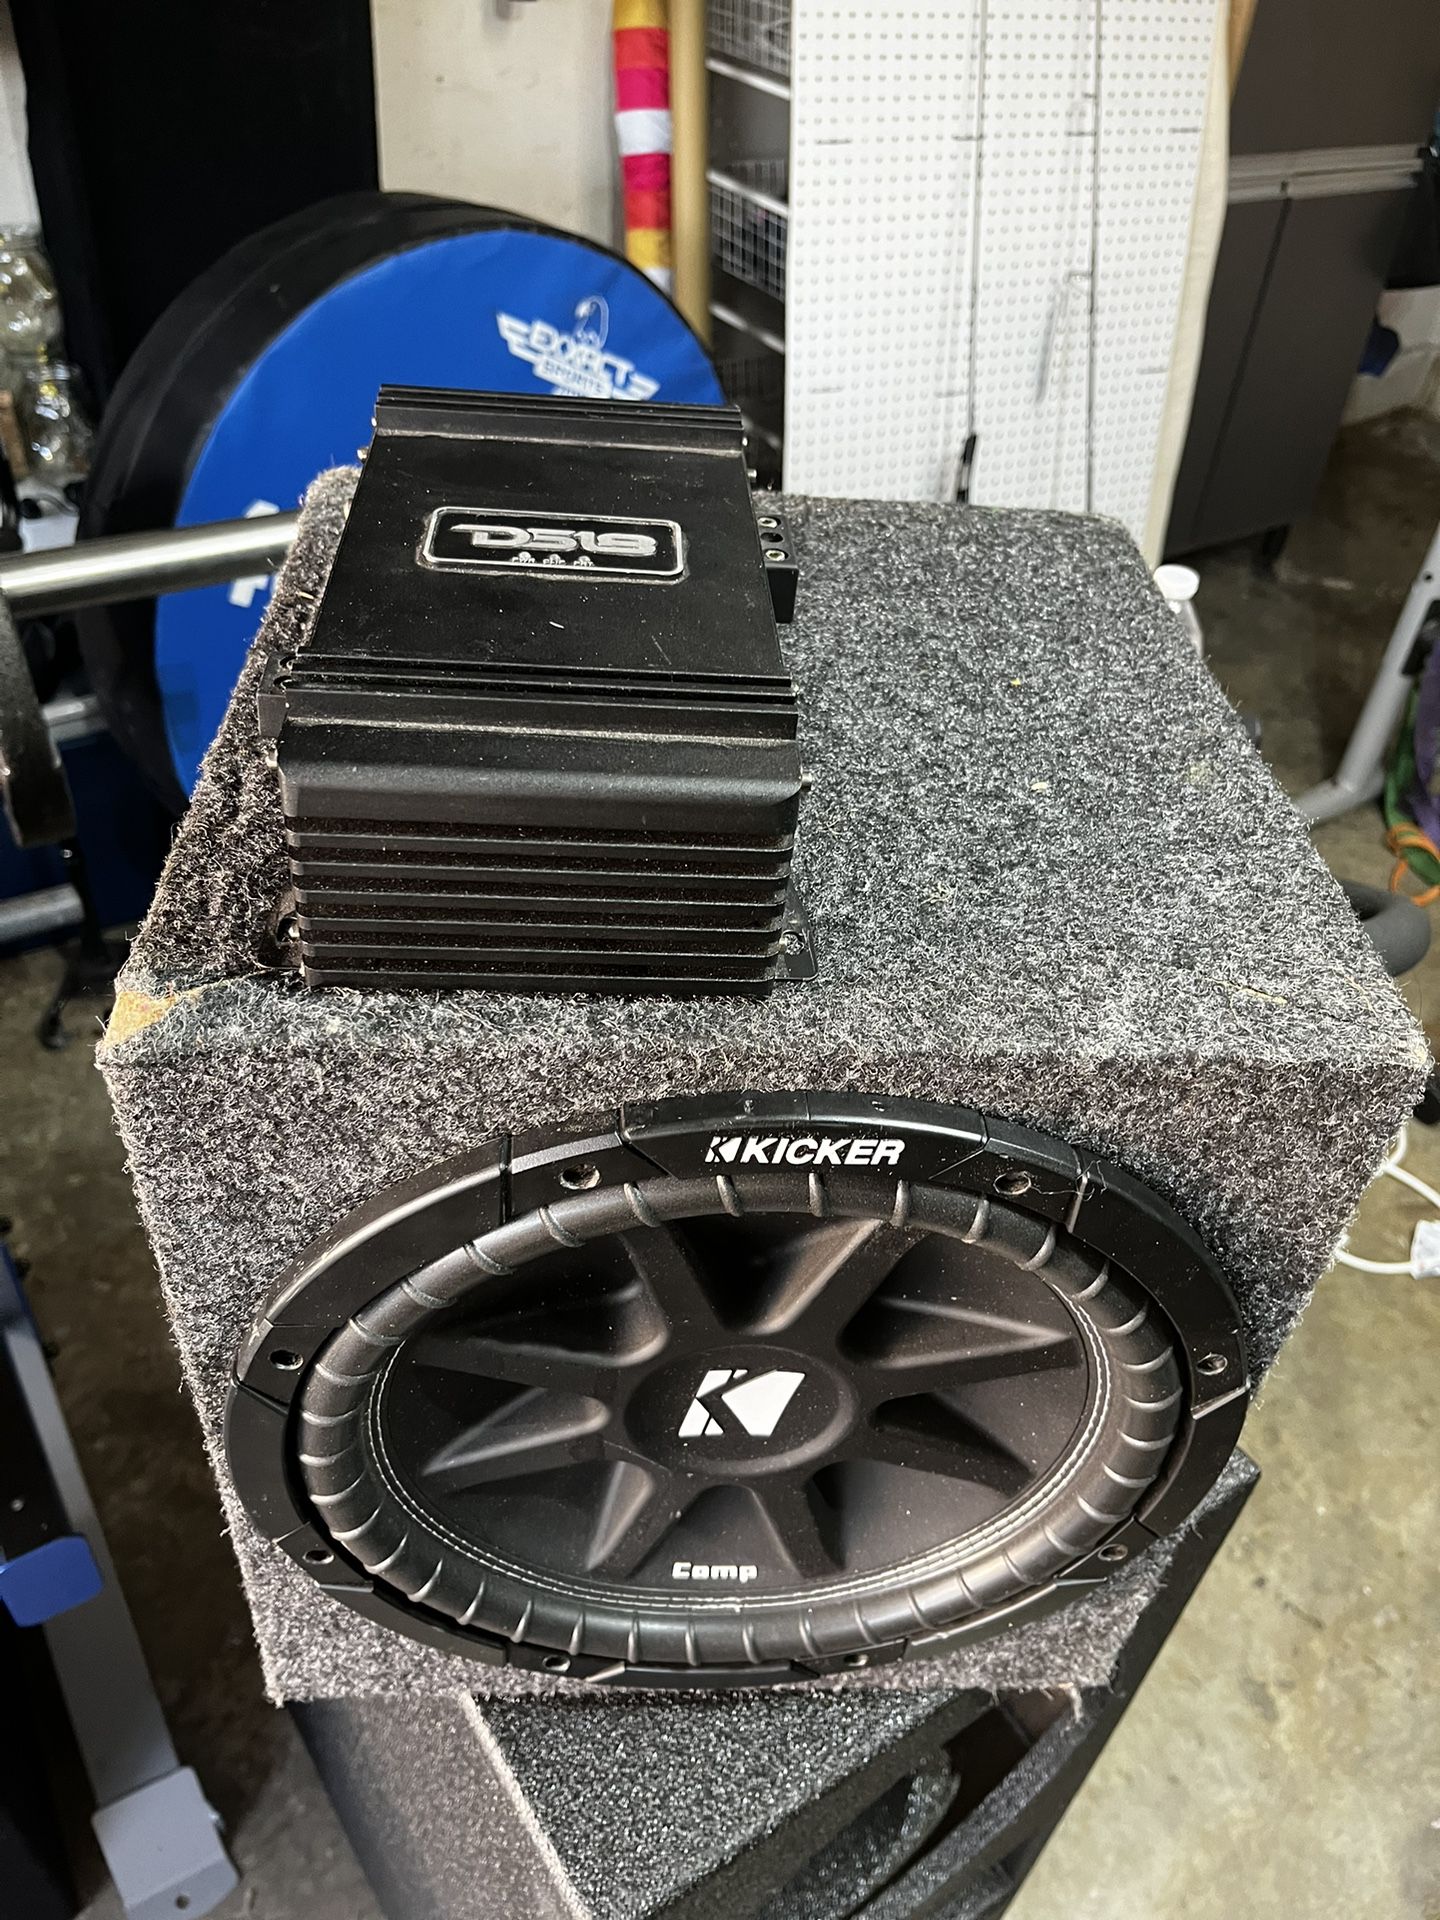 Kicker 12” Subwoofer And Ds18 Amp $200